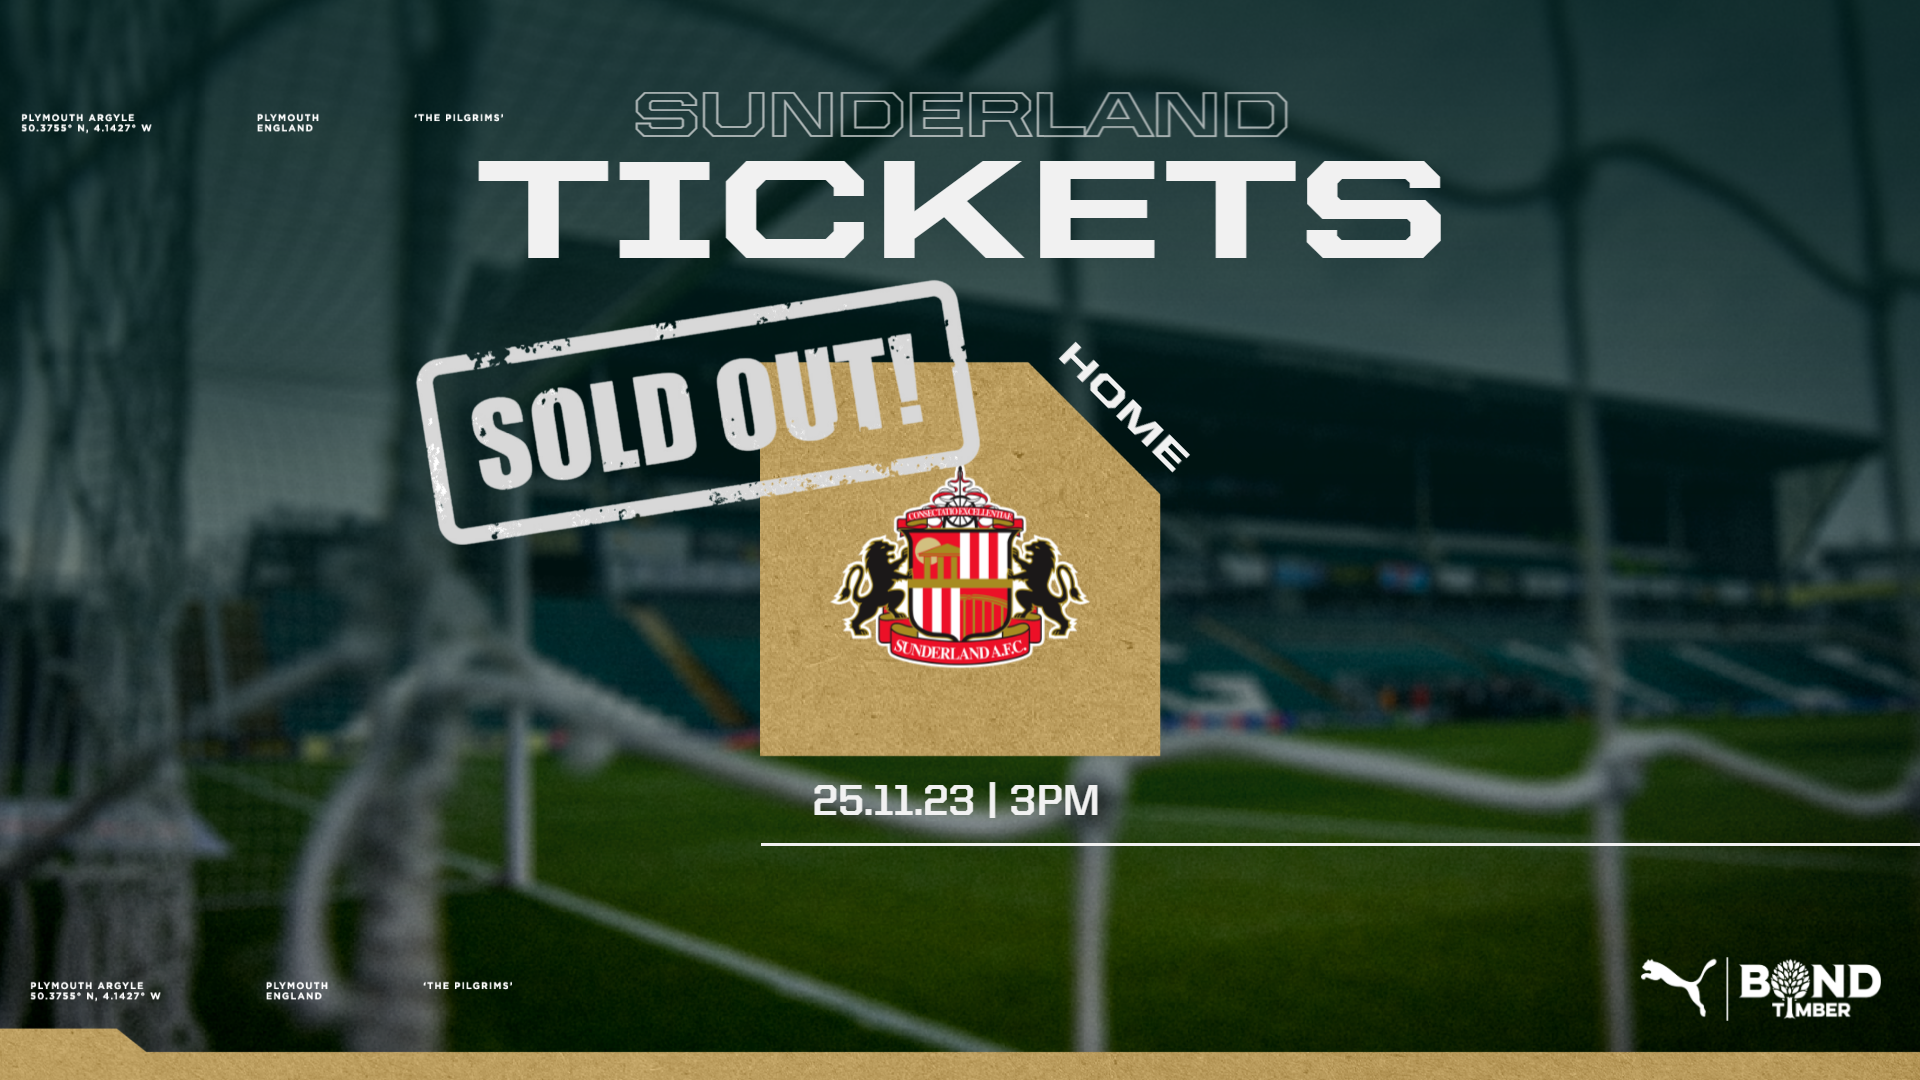 Sunderland tickets sold out